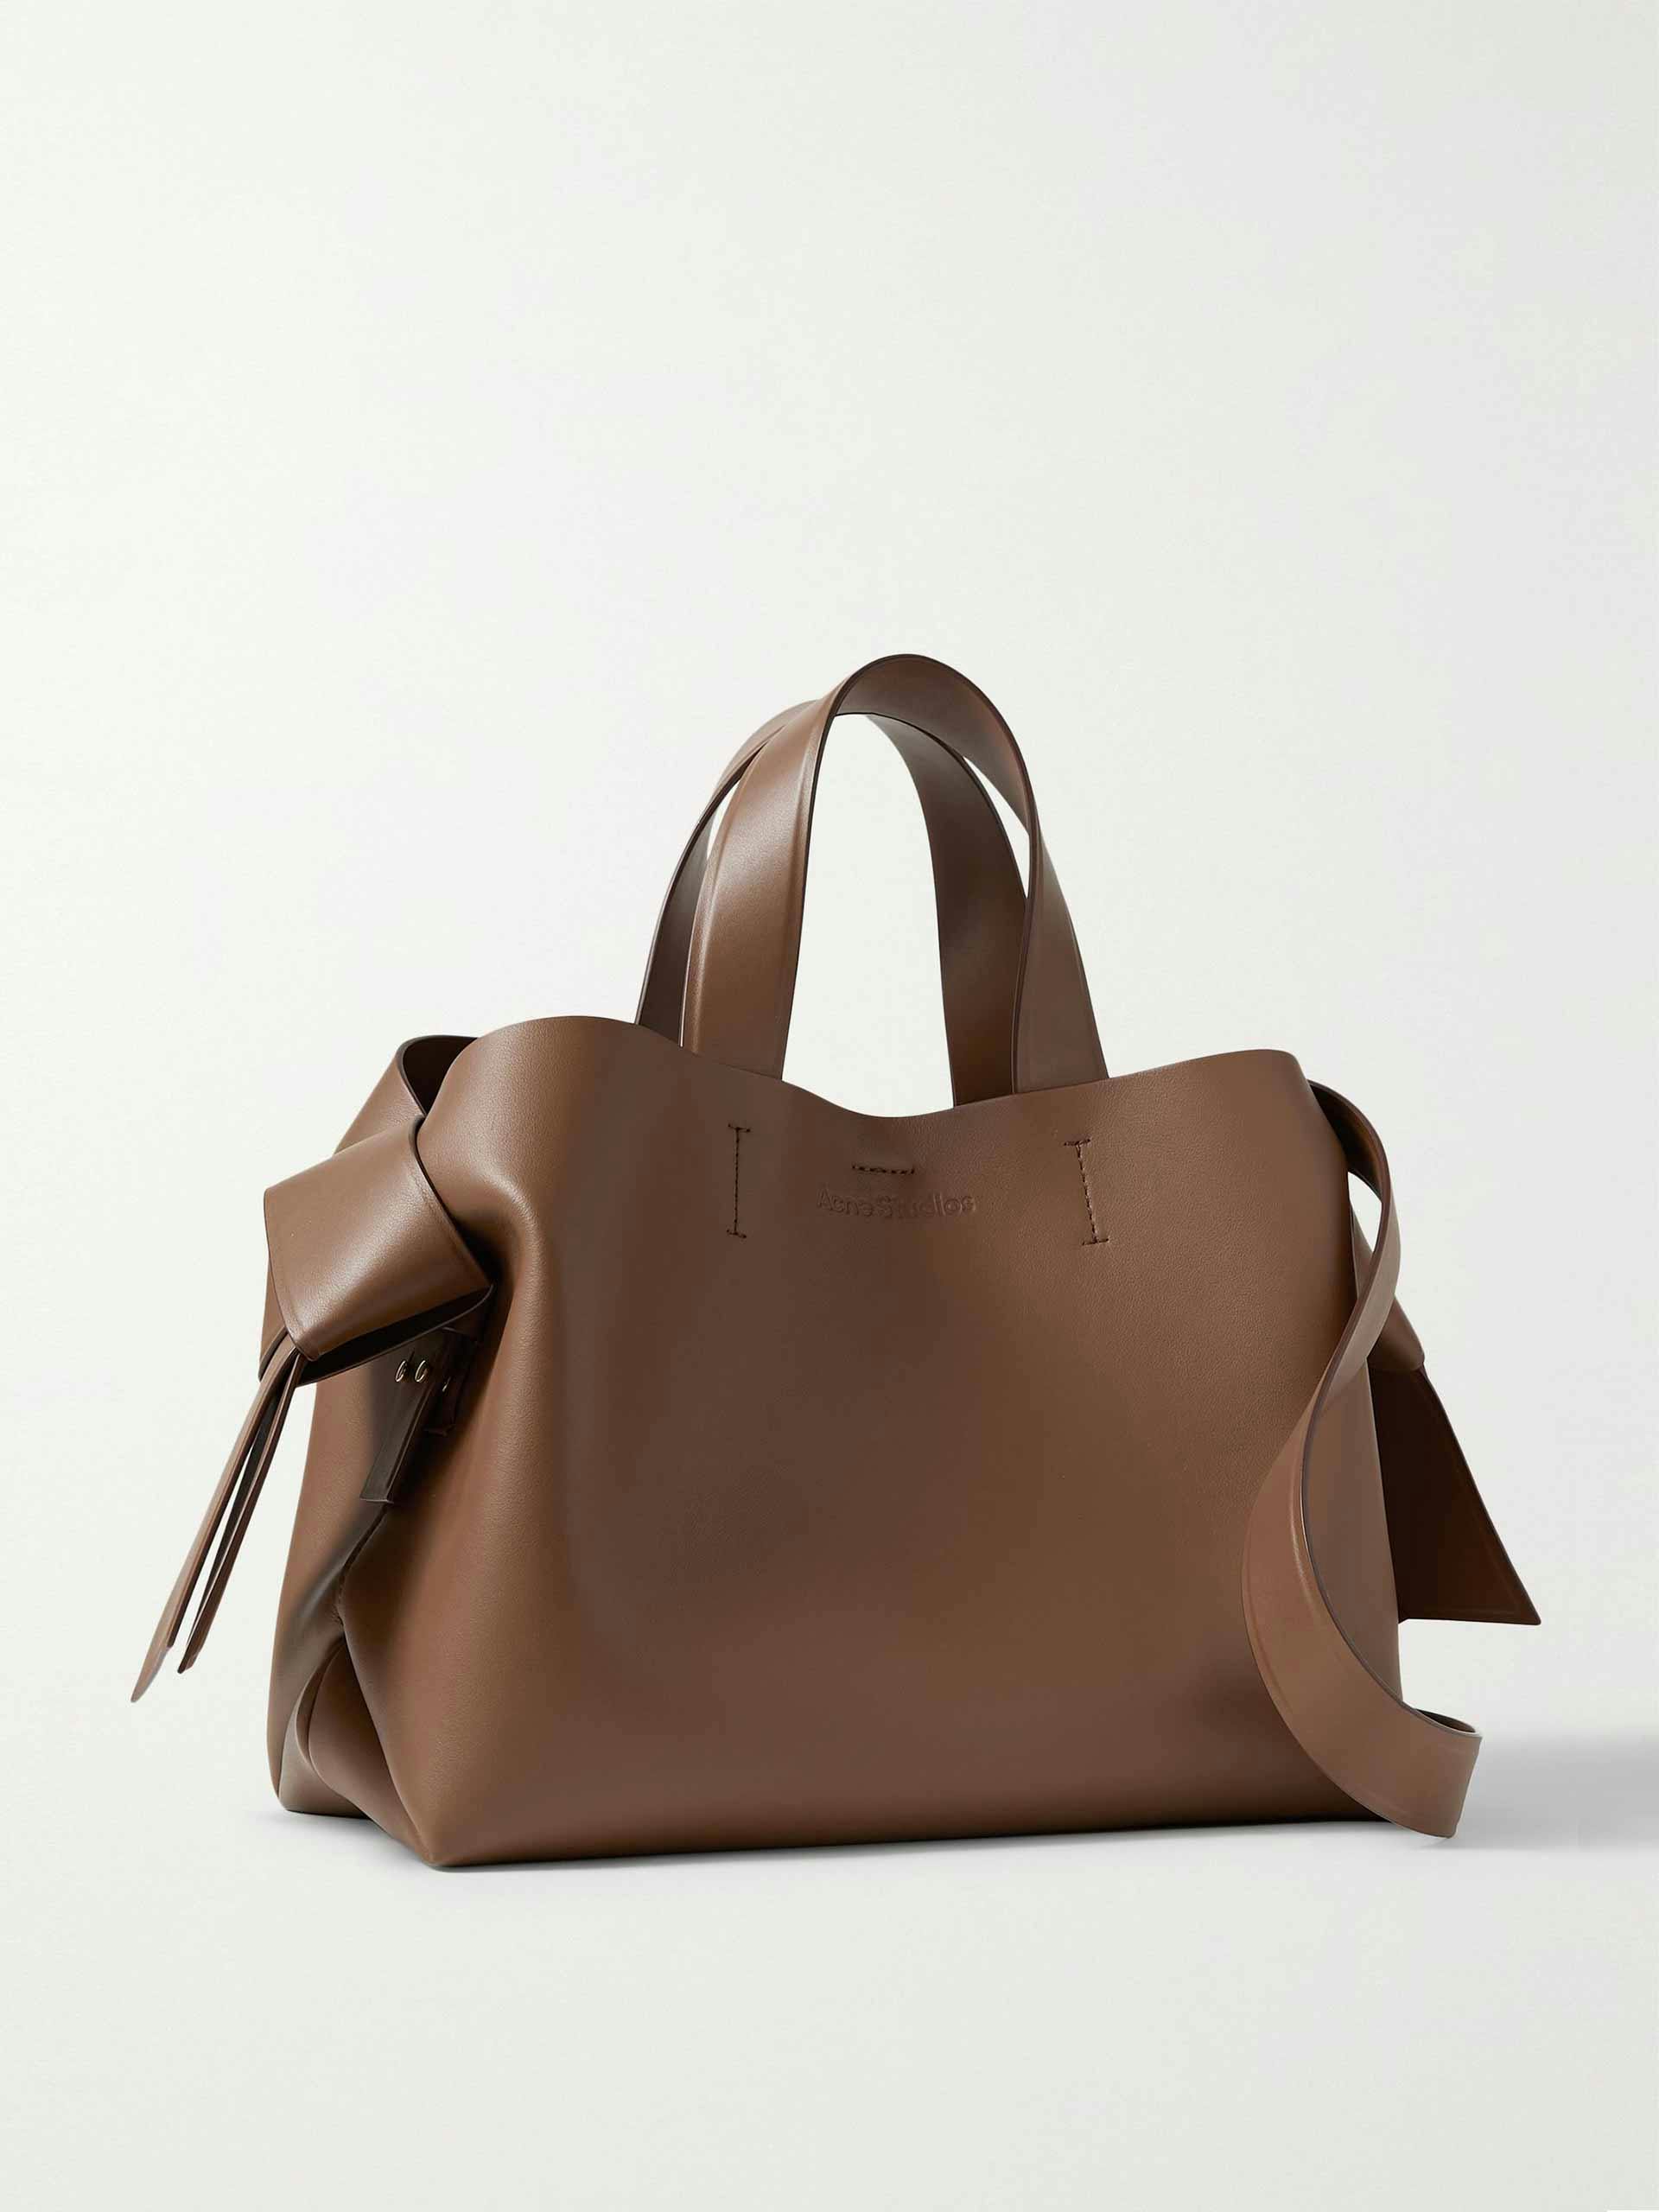 Brown knotted leather tote